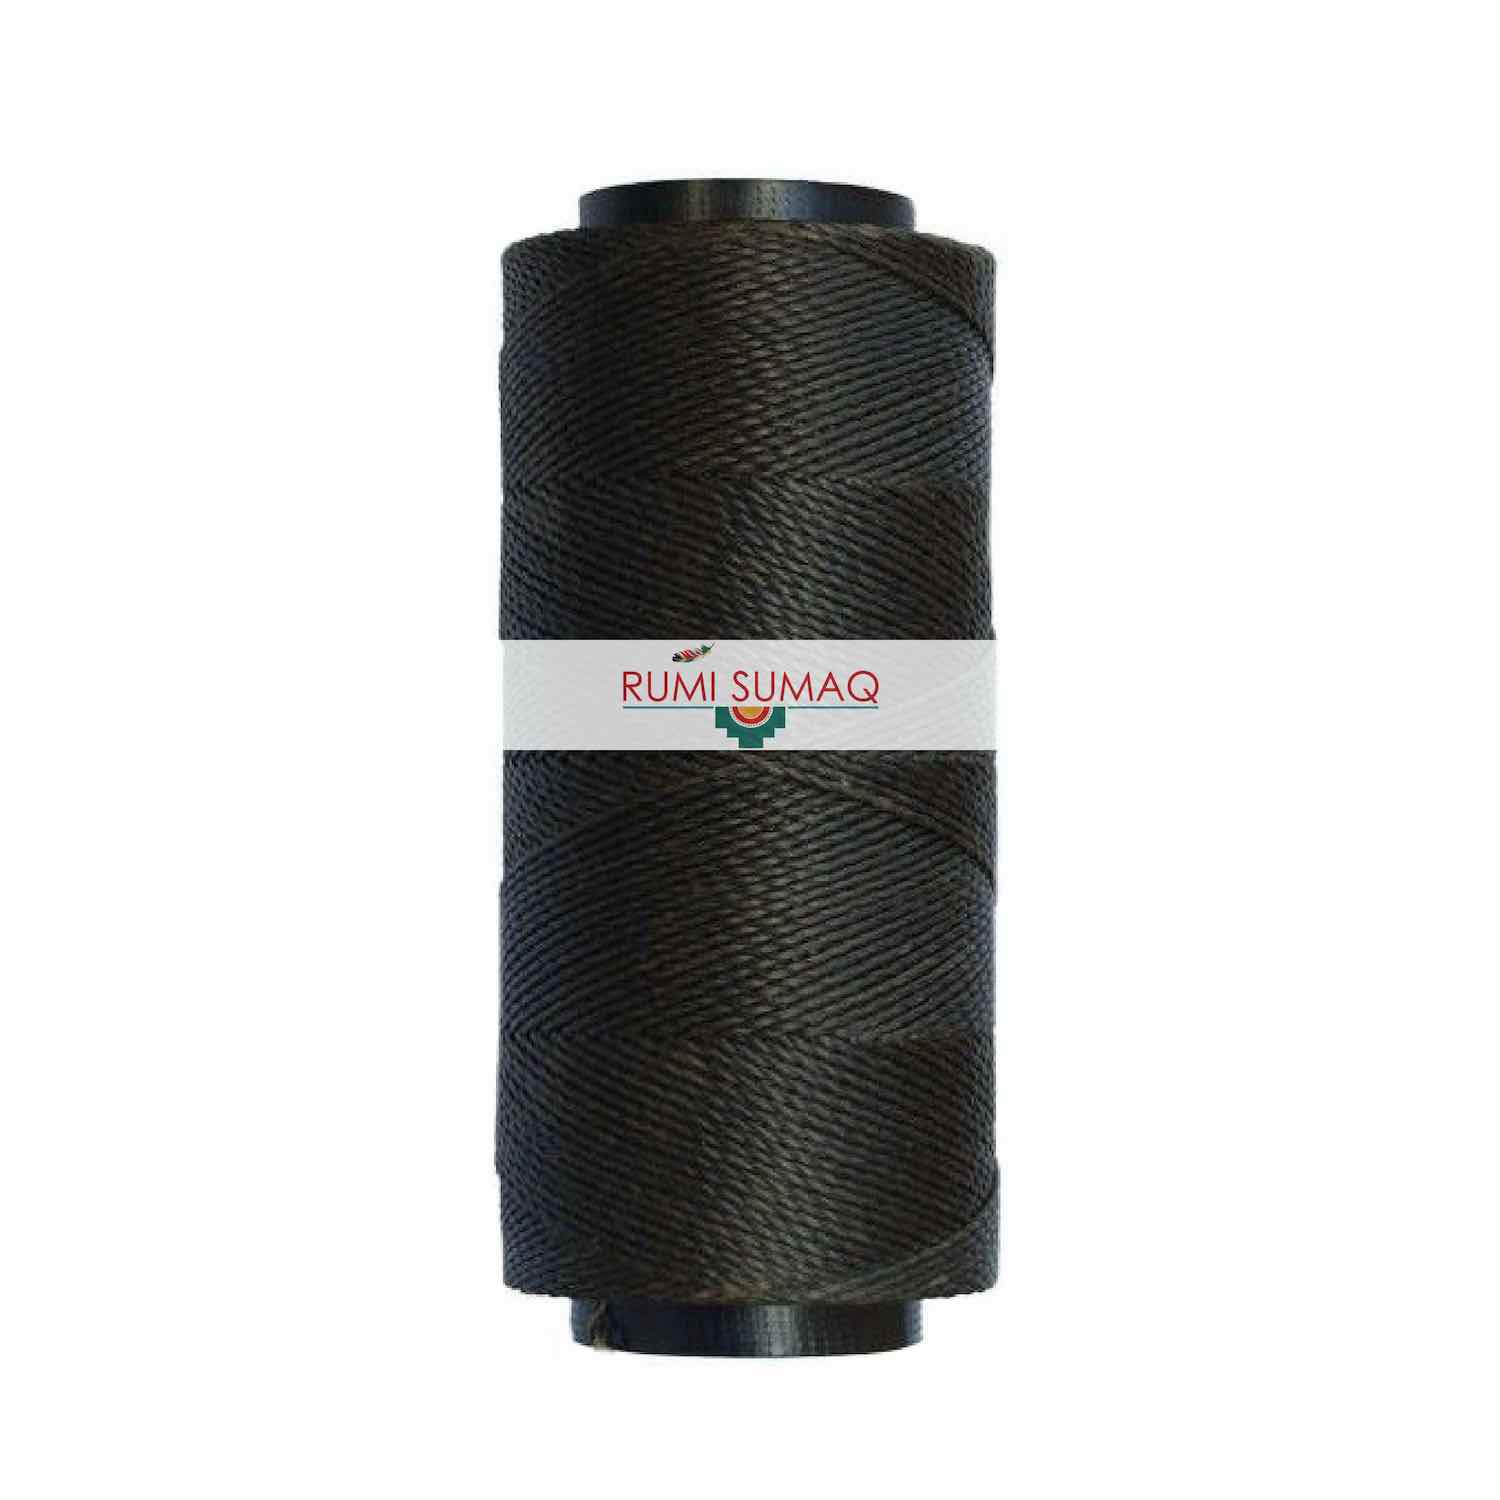 Settanyl 08-771 Olive Grey Waxed Polyester Cord from Brazil | RUMI SUMAQ Waxed Thread for Leather Working, Quilting, Basket Weaving, Macrame Knotting, Beading, and Macrame Jewelry.